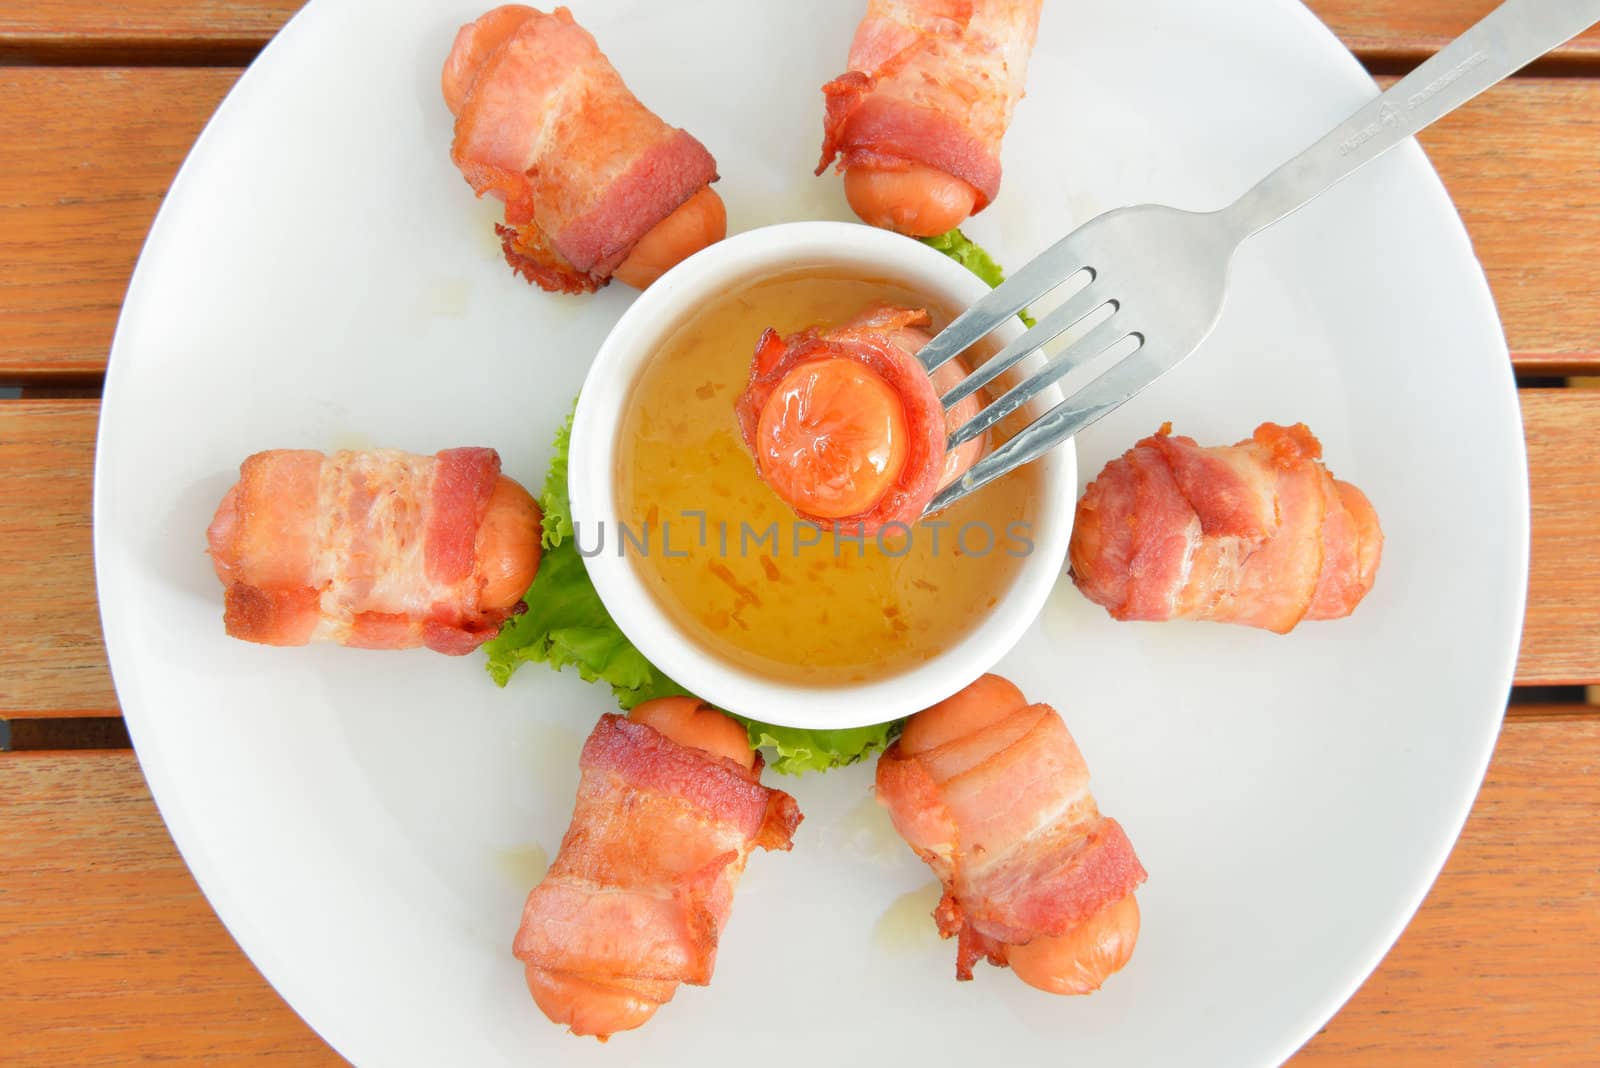 Top view of food call "Deep fired sausage wrapped with bacon"